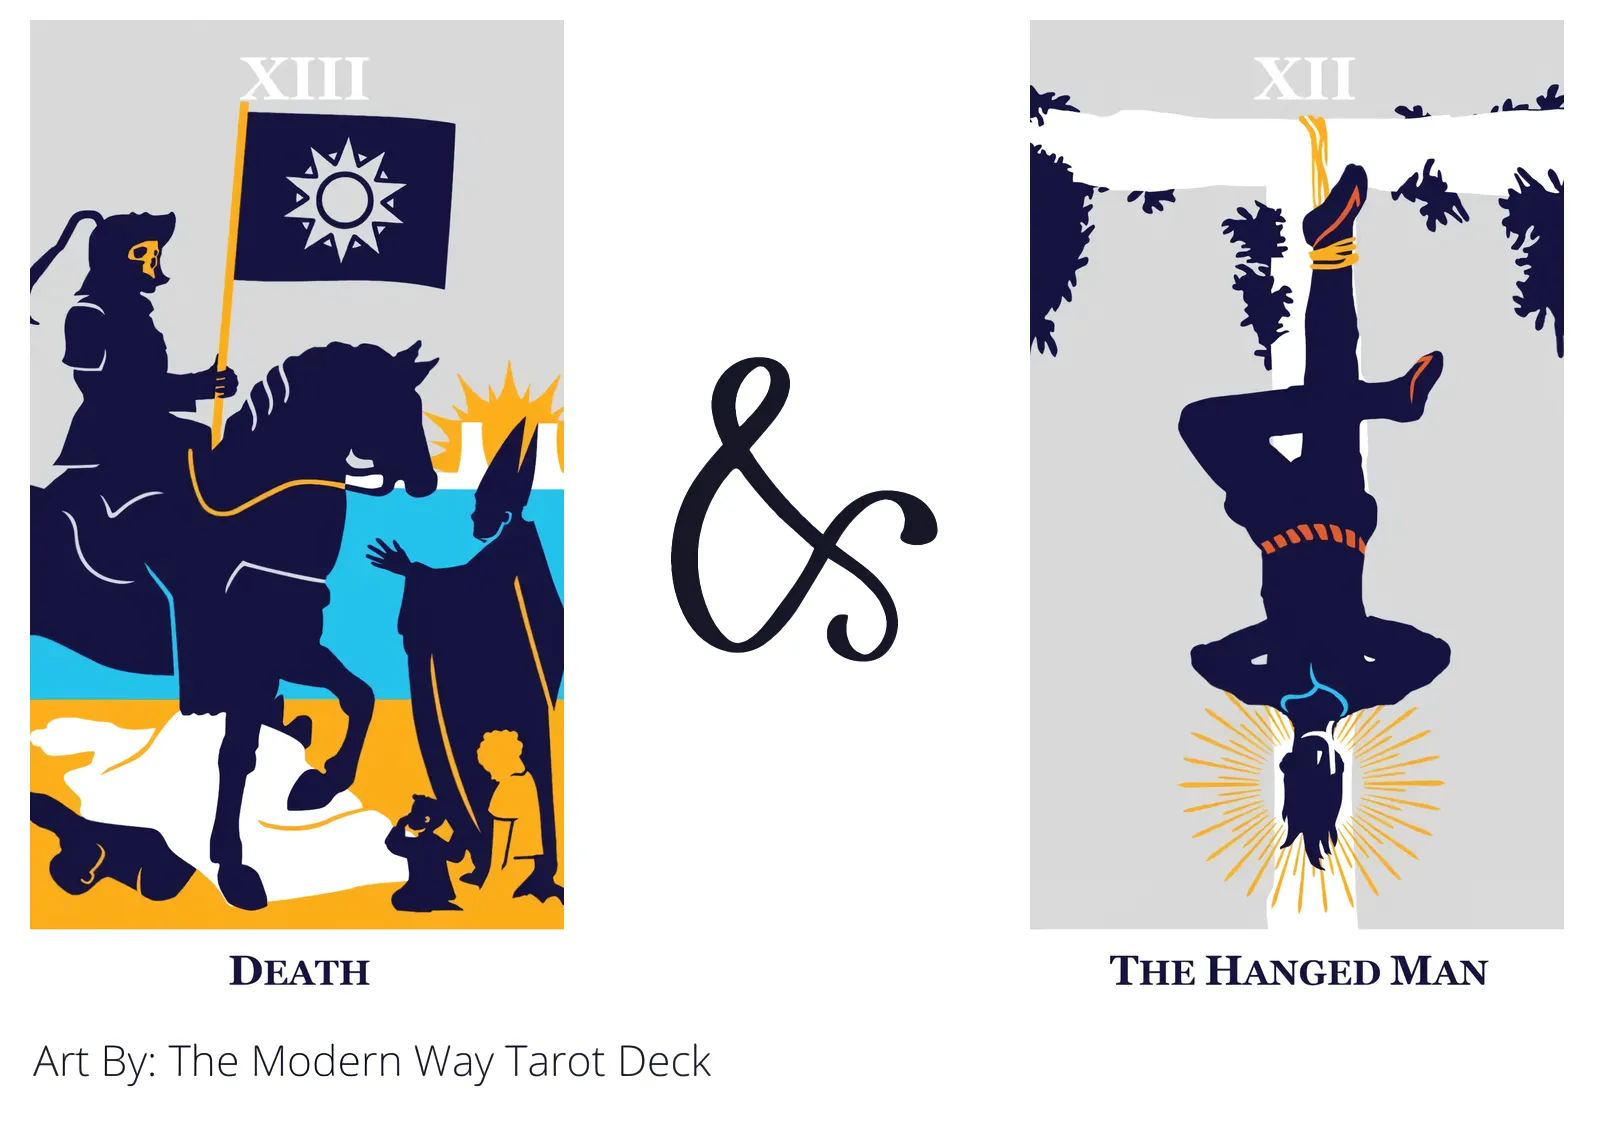 death and the hanged man tarot cards together